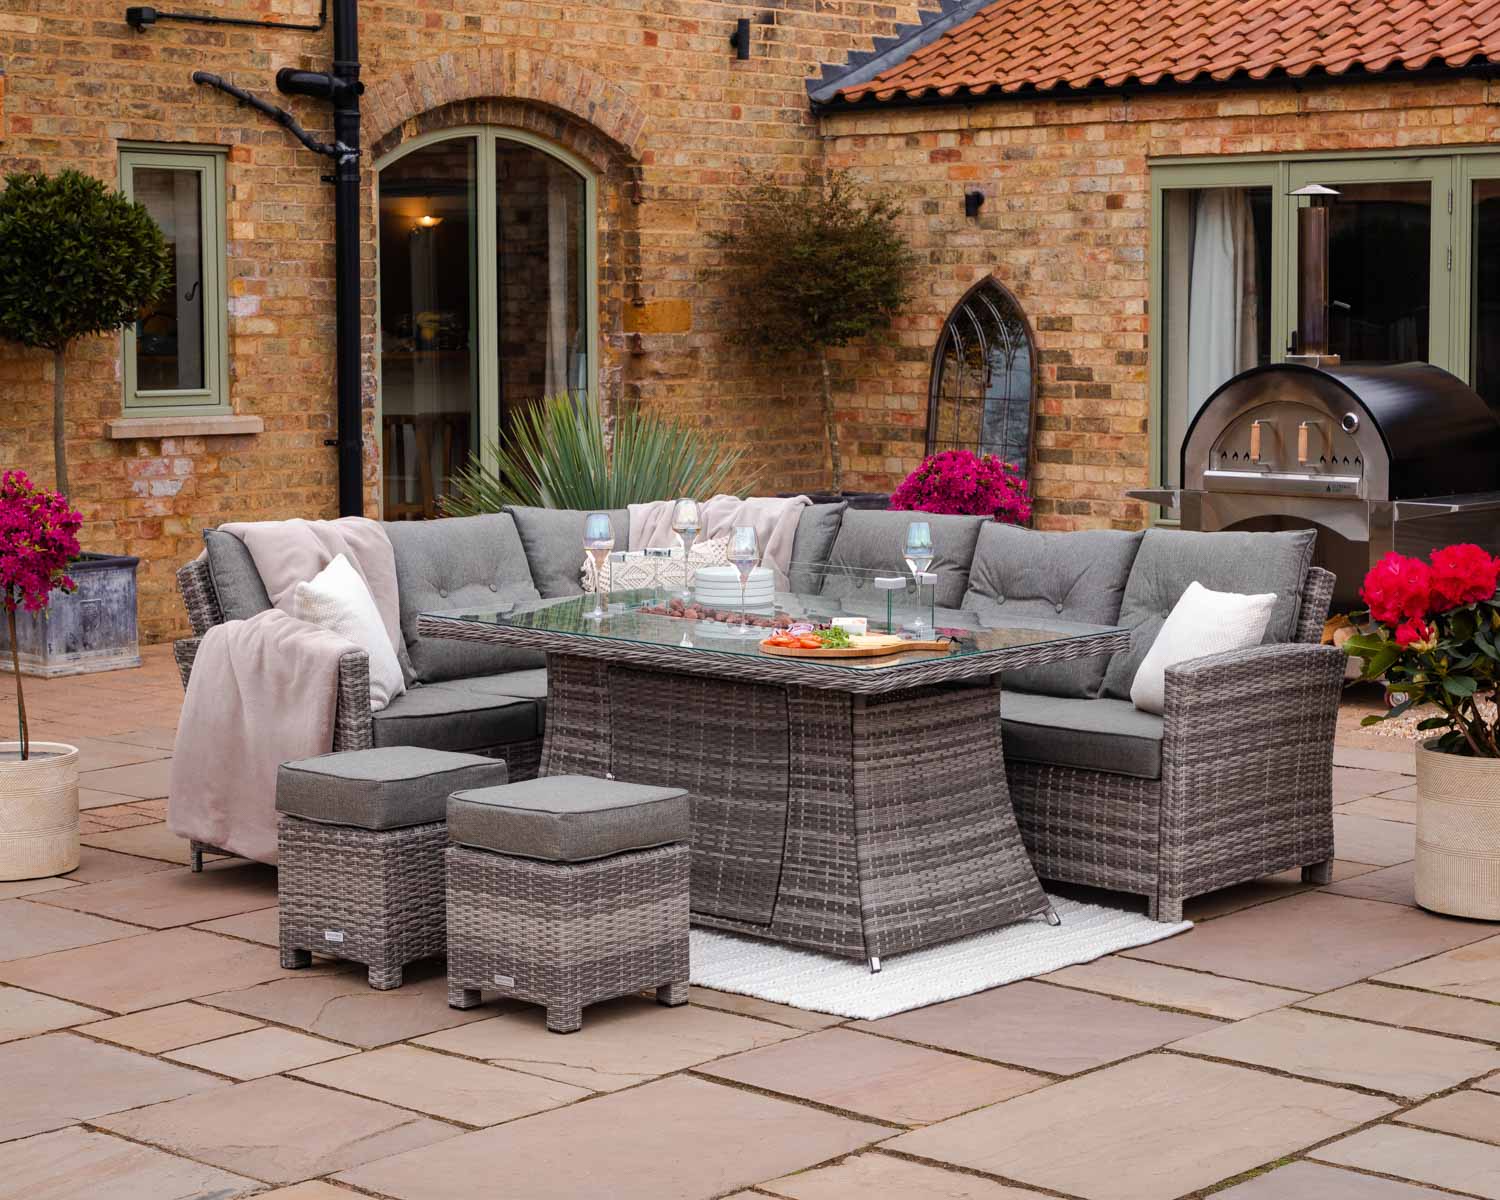 Sorrento Rattan Garden Corner Dining Set With Rectangular Fire Pit Table In Willow